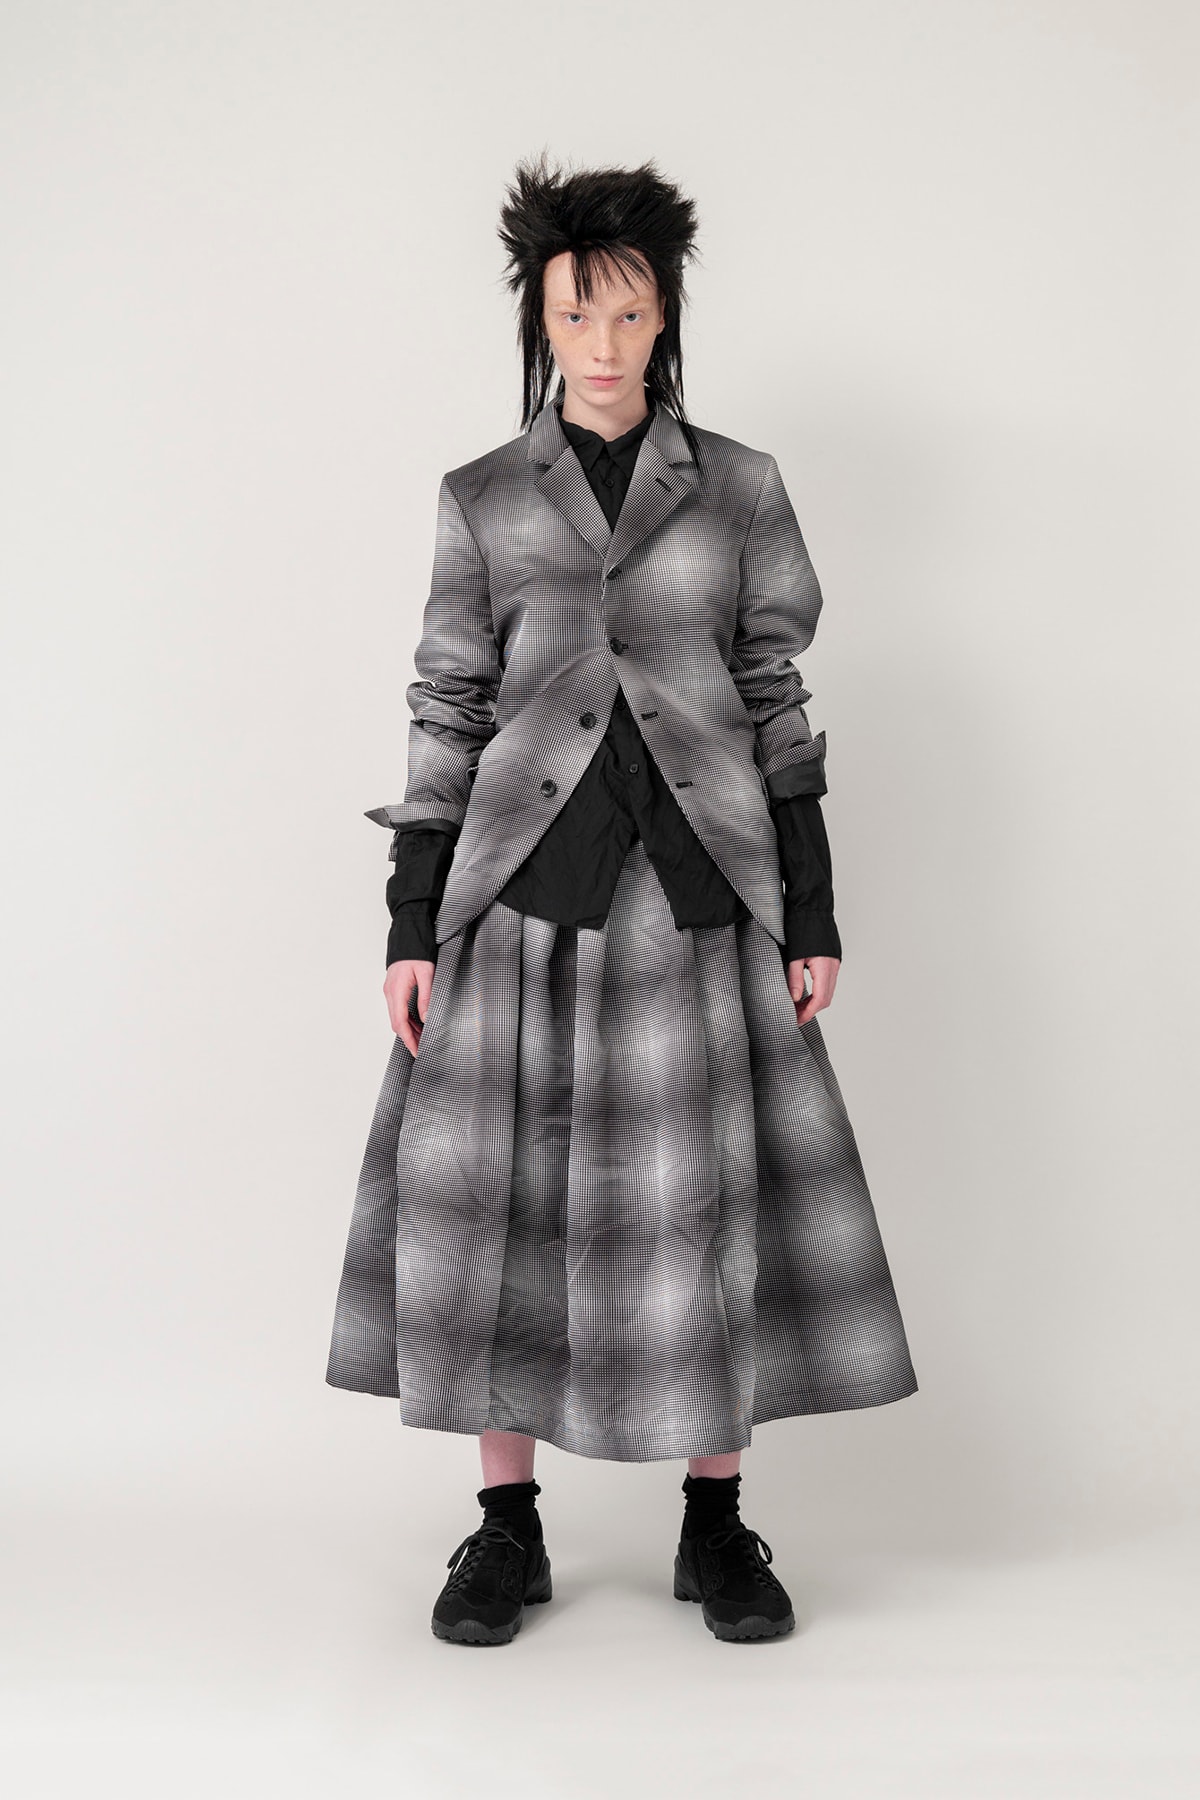 Nike x BLACK COMME des GARCONS Fall/Winter 2019 Collection Jacket Skirt Plaid Womens